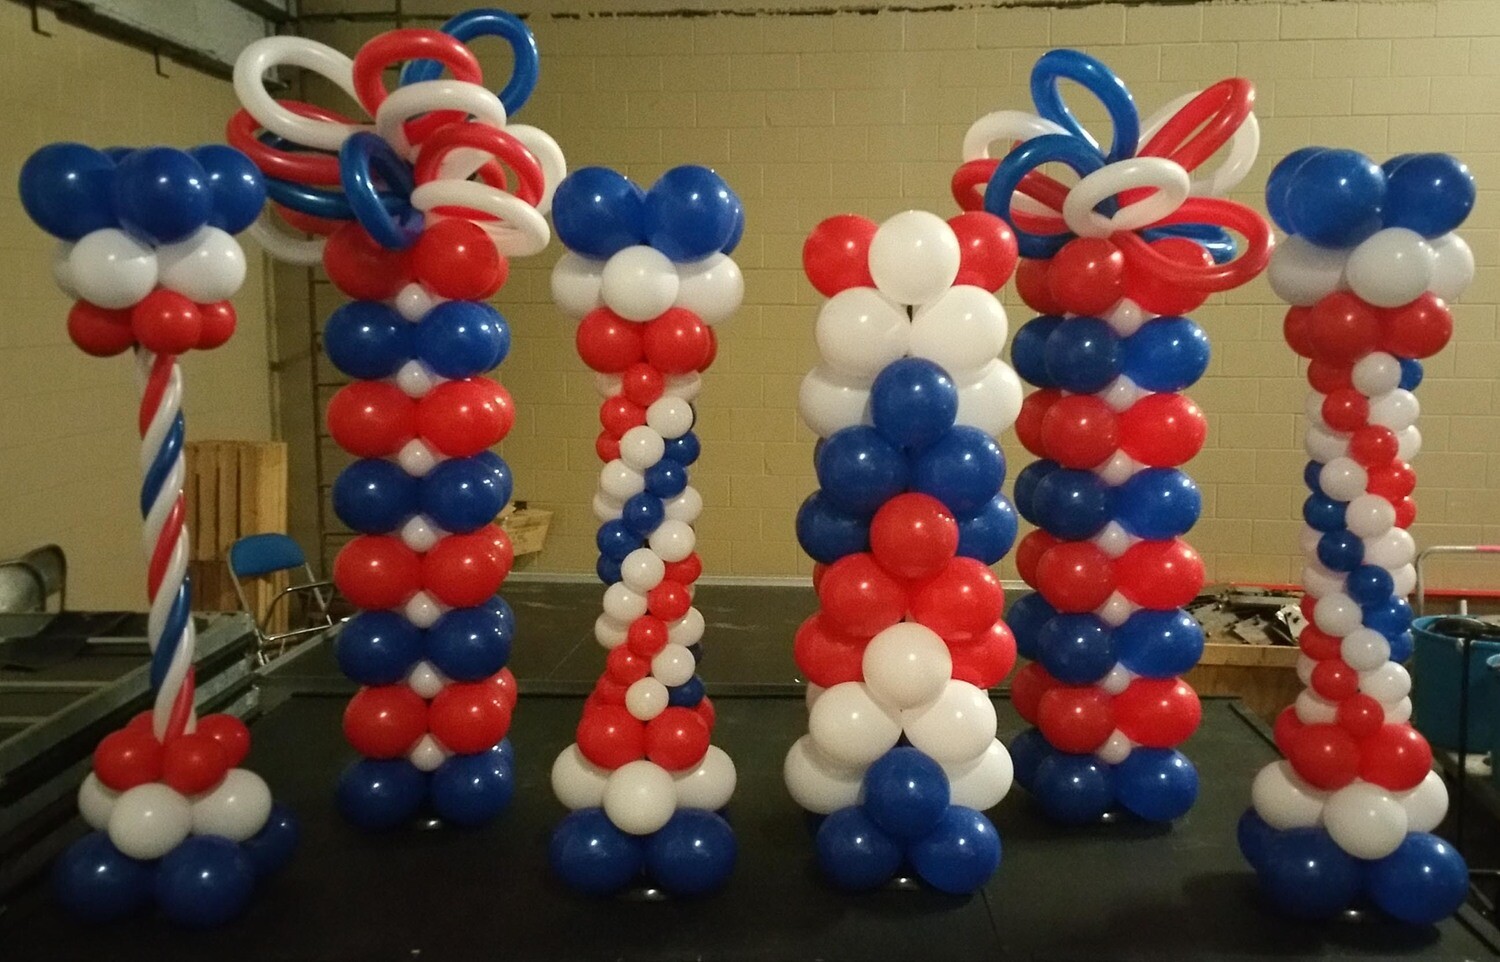 Crazy Balloon Red white and blue 4th of July balloon column, custom